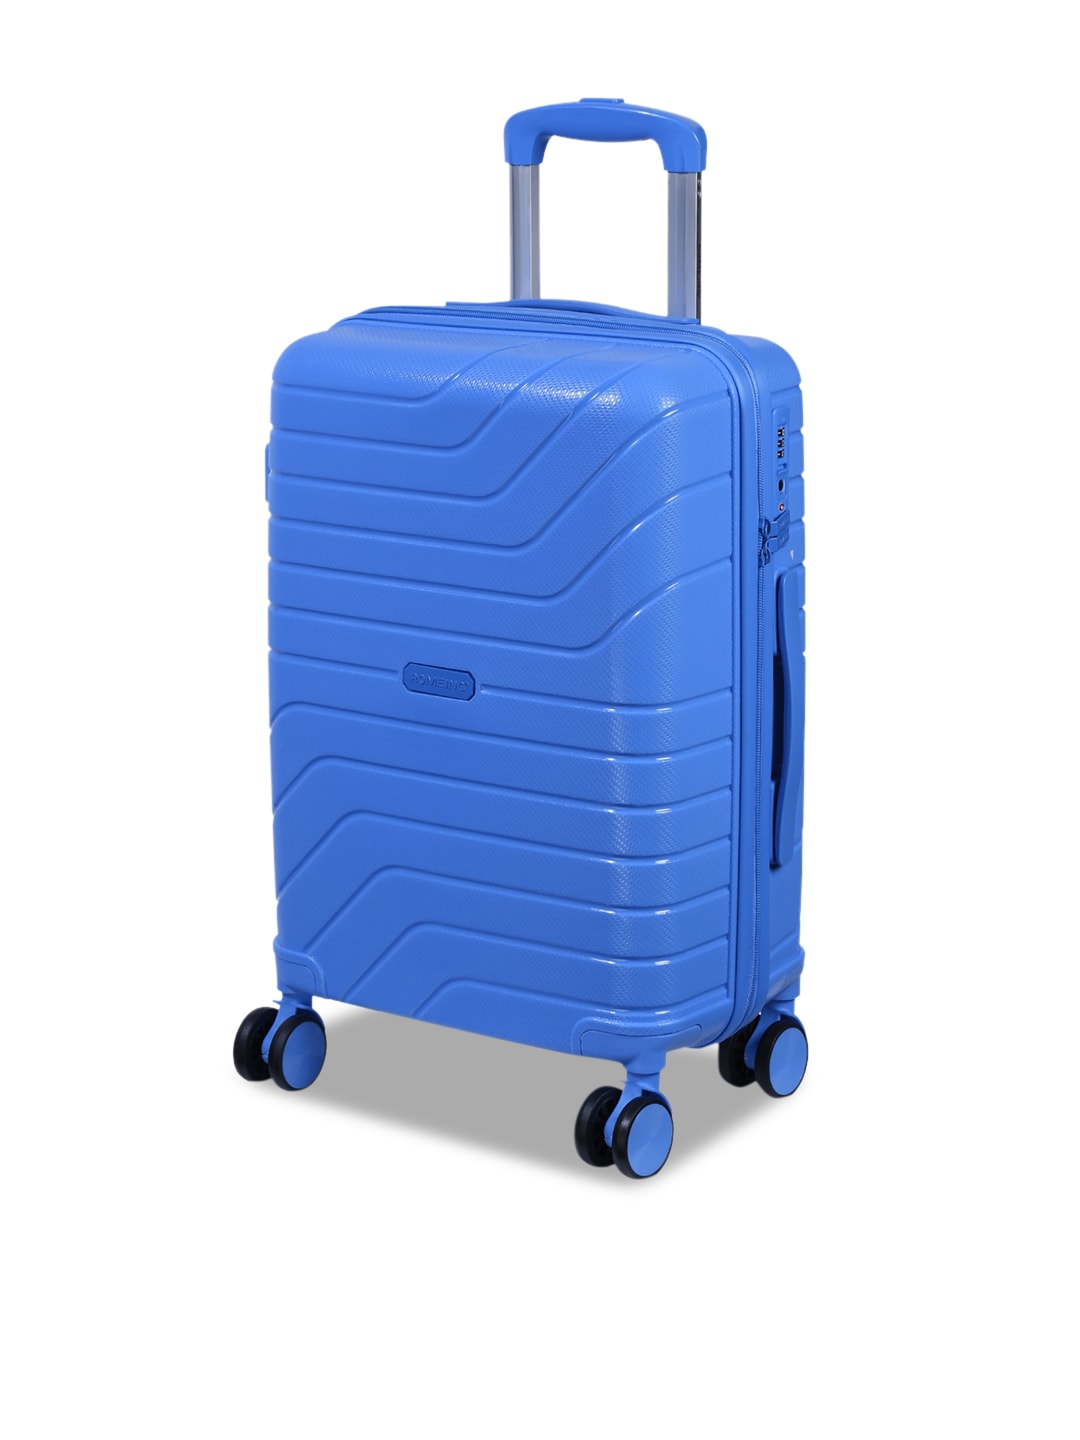 ROMEING Tuscany Sky Blue Textured Hard Sided Polypropylene Cabin Trolley Suitcase Price in India